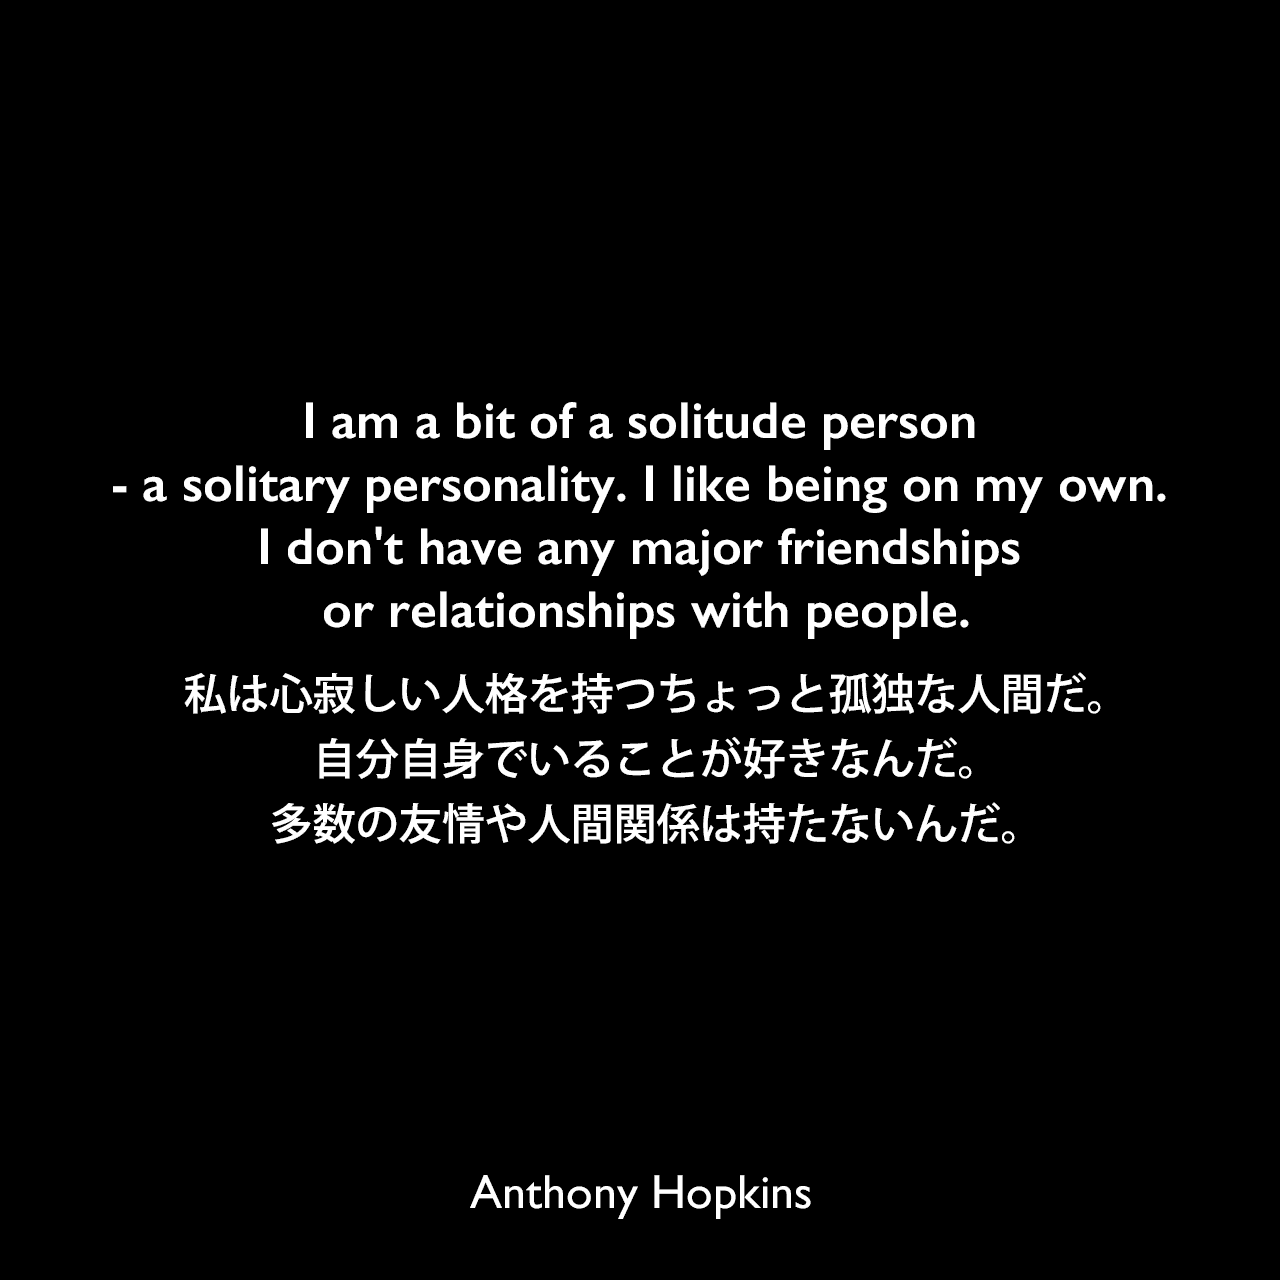 I am a bit of a solitude person - a solitary personality. I like being on my own. I don't have any major friendships or relationships with people.私は心寂しい人格を持つちょっと孤独な人間だ。自分自身でいることが好きなんだ。多数の友情や人間関係は持たないんだ。Anthony Hopkins